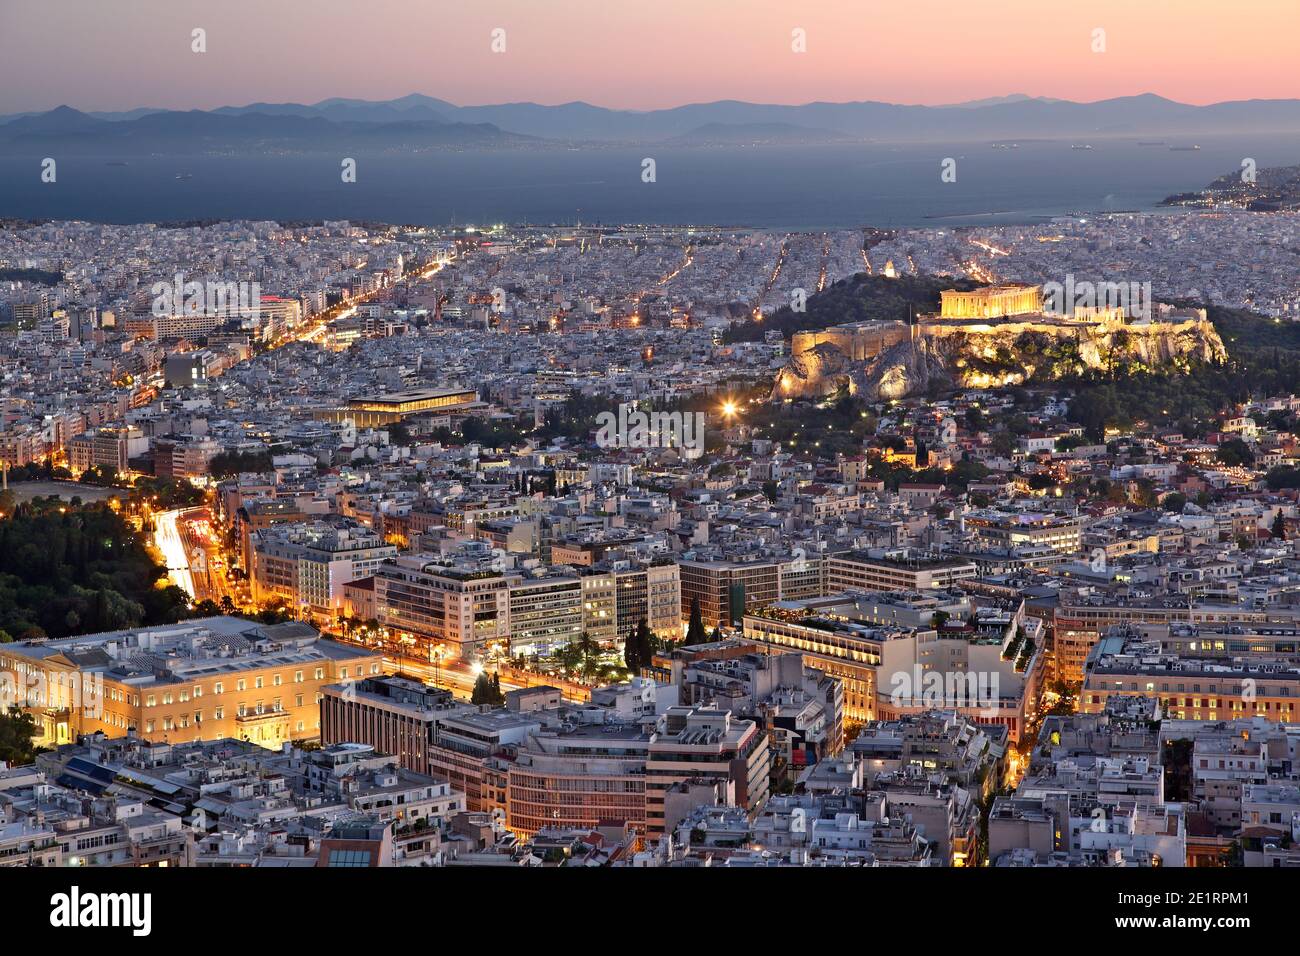 View of the city of Athens, during sunset. On the right there can be seen Acropolis and the Parthenon, and on bottom left the Greek Parliament. Stock Photo